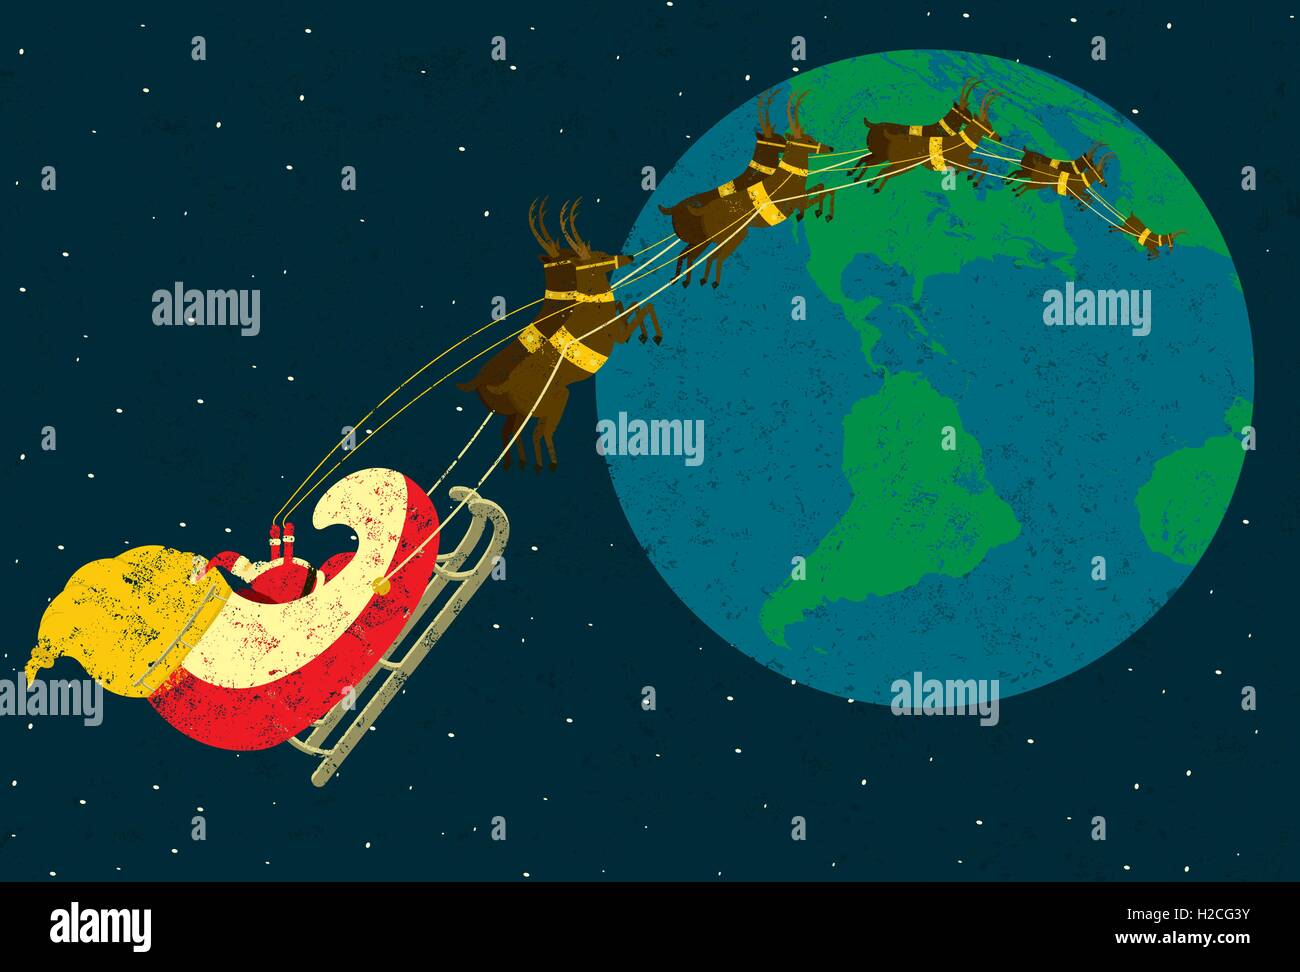 Santa delivering presents Santa Claus flying around the world in his sleigh being pulled by his reindeer. Stock Vector